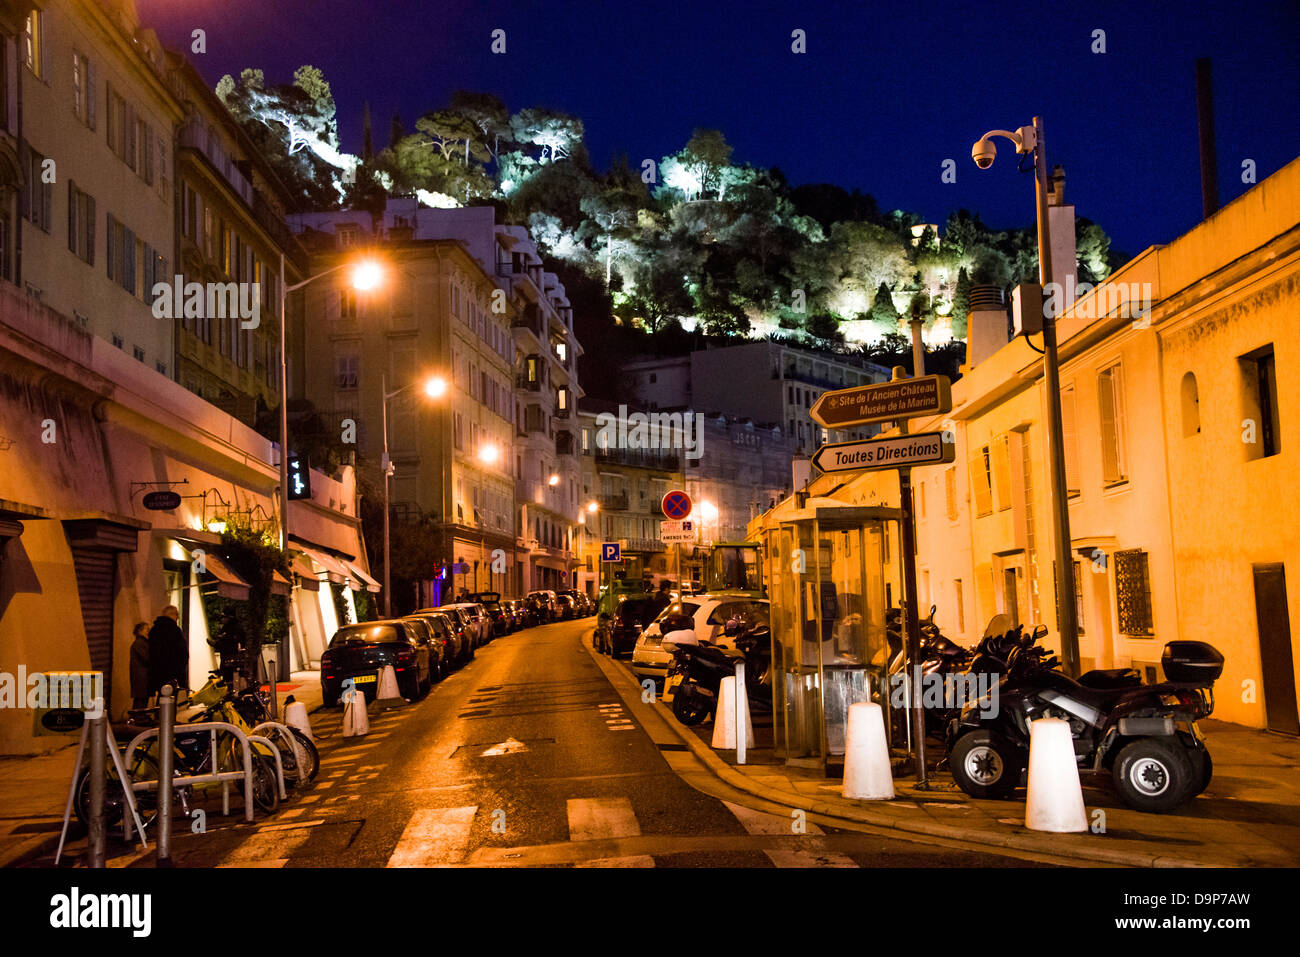 A small side street with parked cars next to the Promenade des Anglais in the old town of Nice France at night with Castle Hill Stock Photo